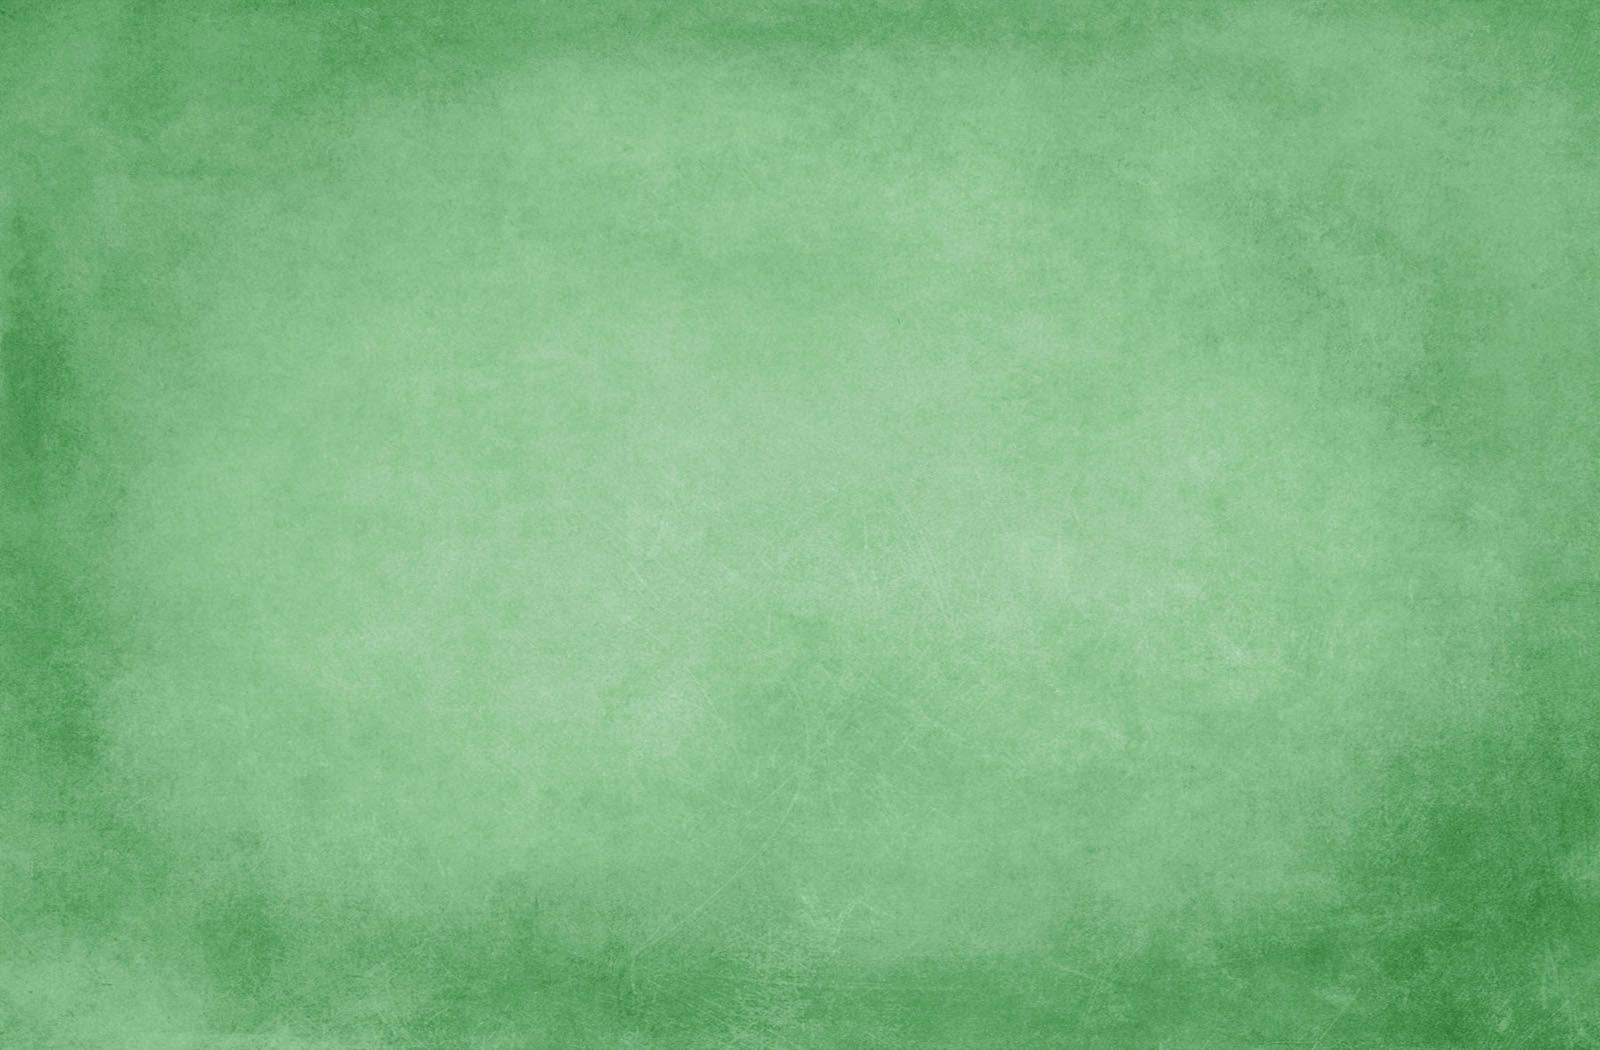 Solid Green Backgrounds